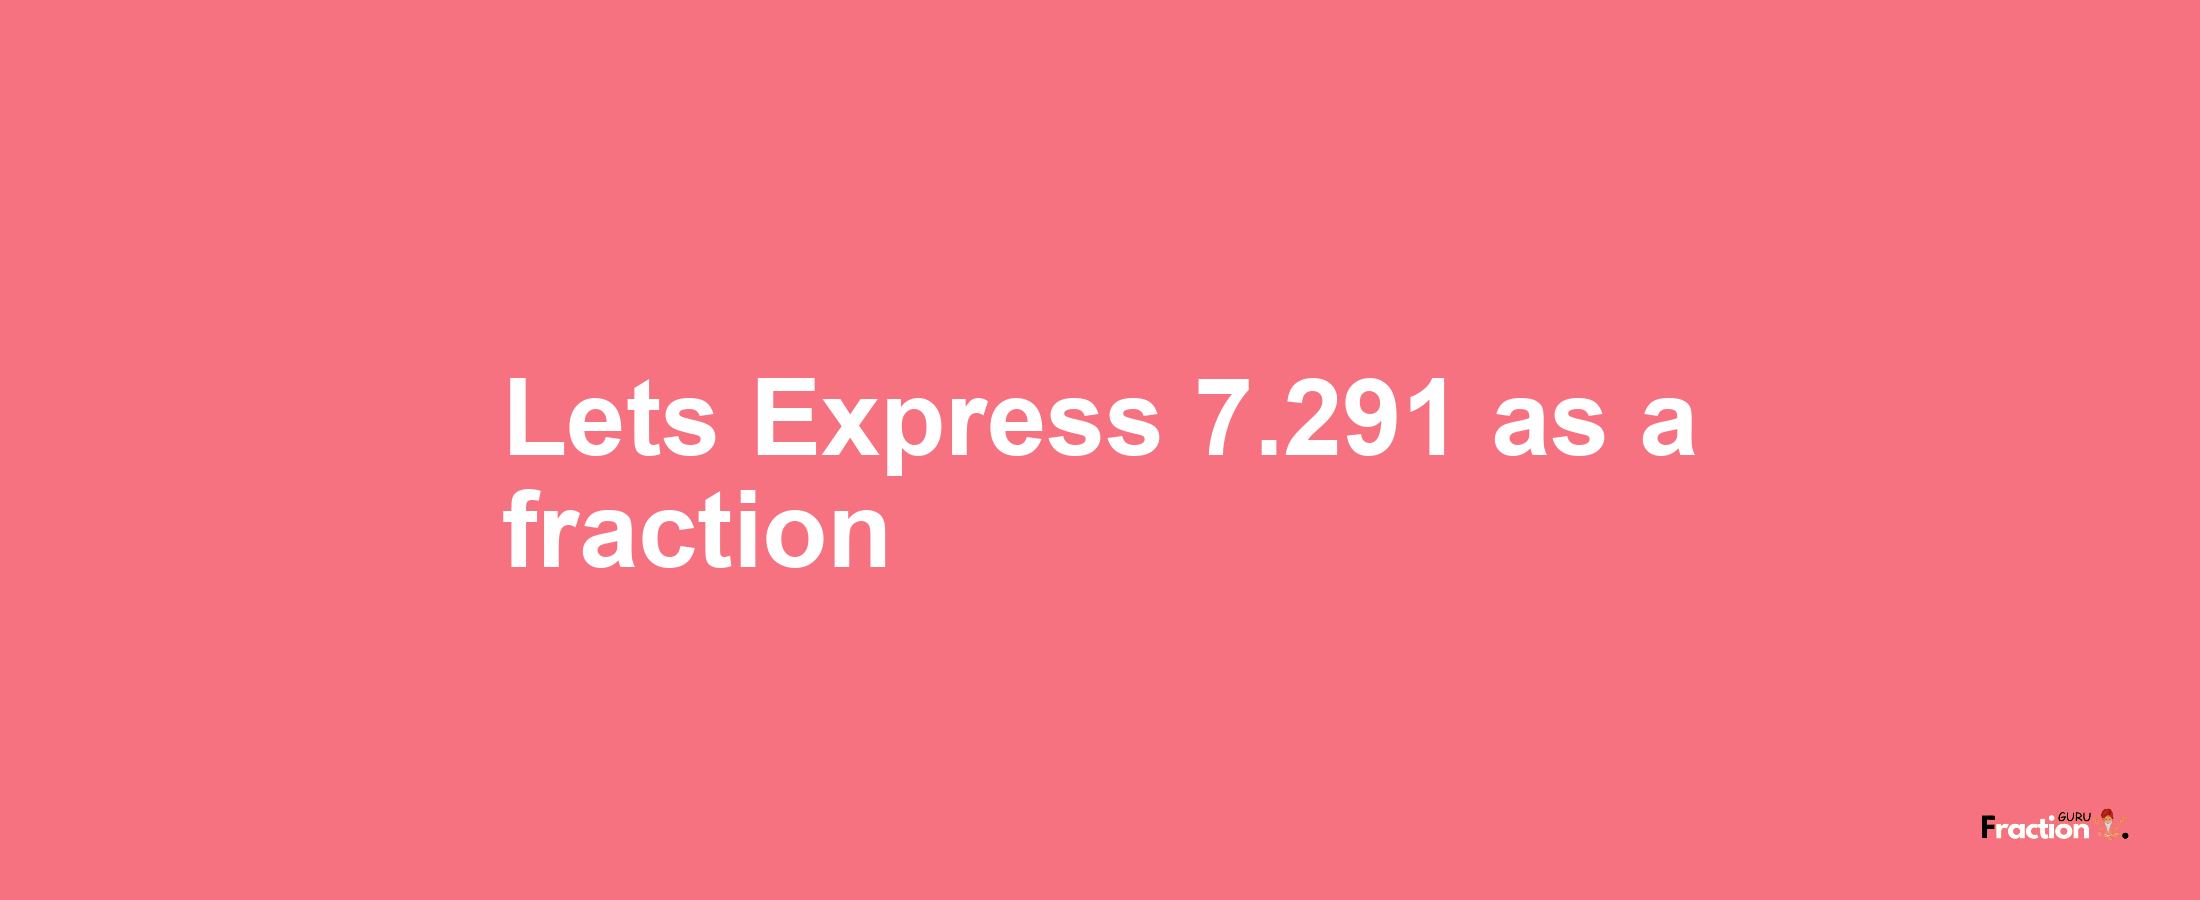 Lets Express 7.291 as afraction